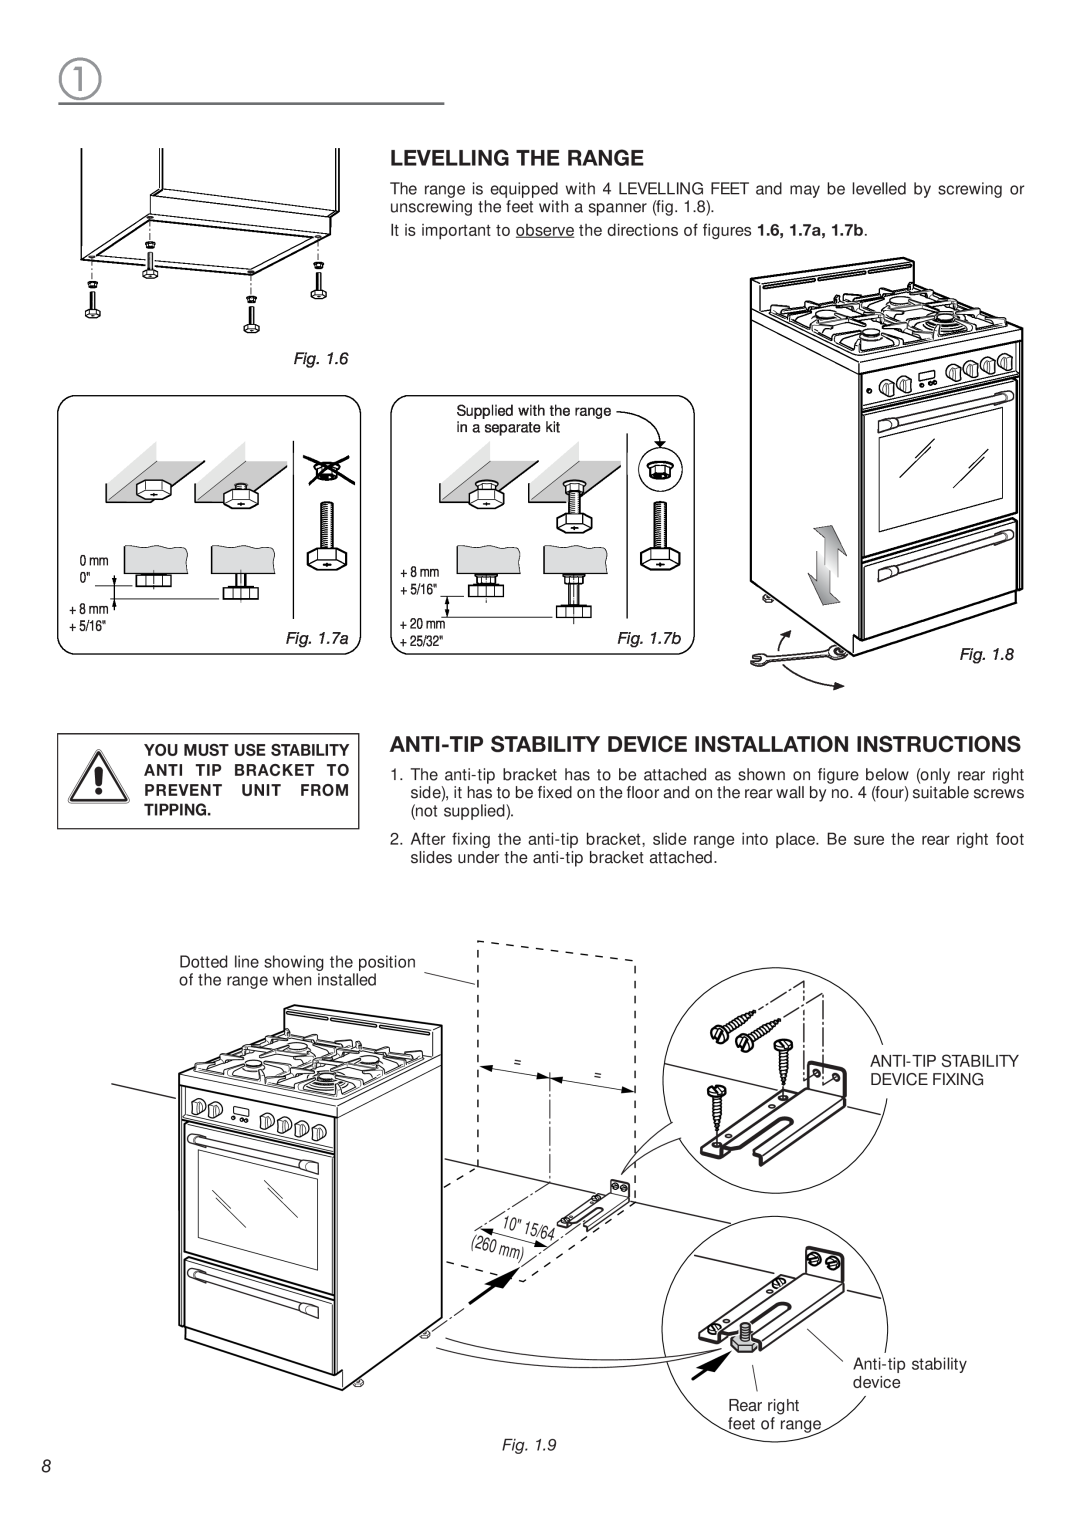 DeLonghi DEFSGG 24 SS Levelling The Range, Anti-Tip Stability Device Installation Instructions, = =, 7a 